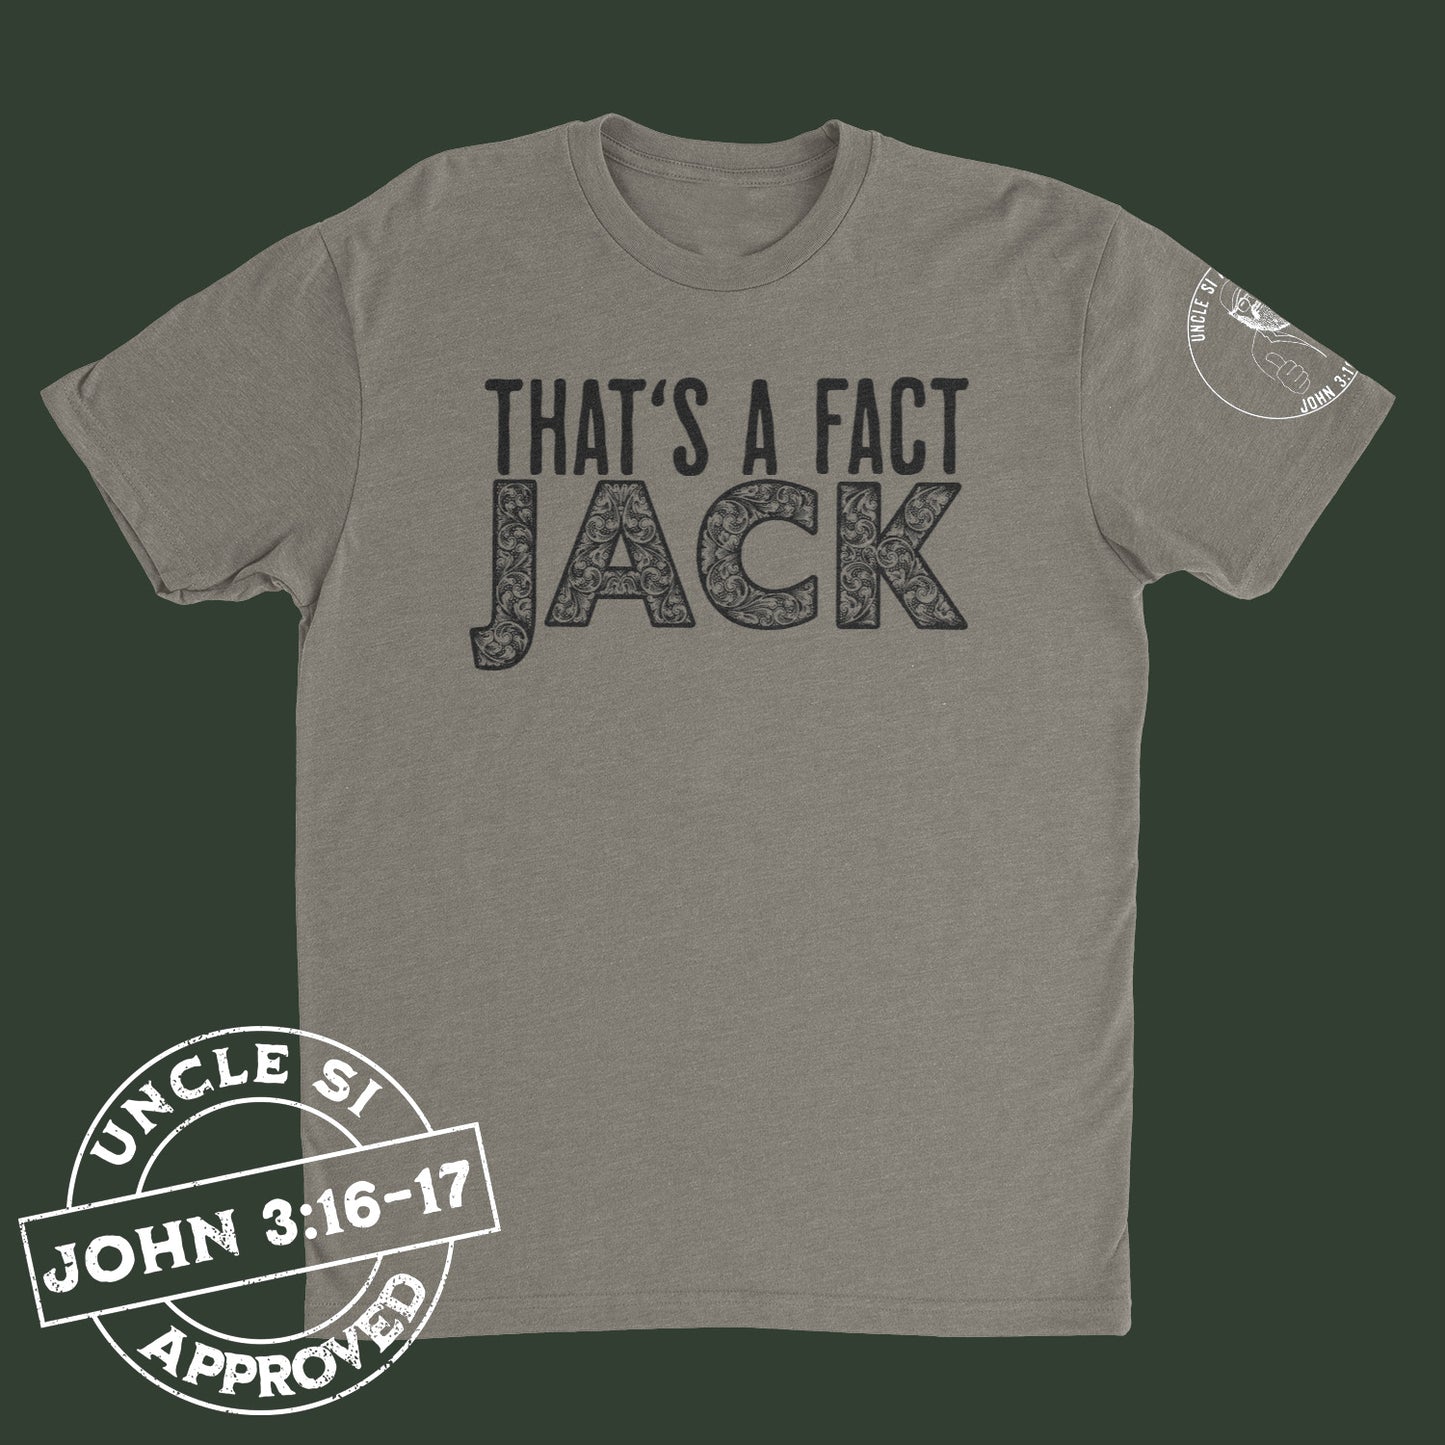 That's A Fact, Jack!